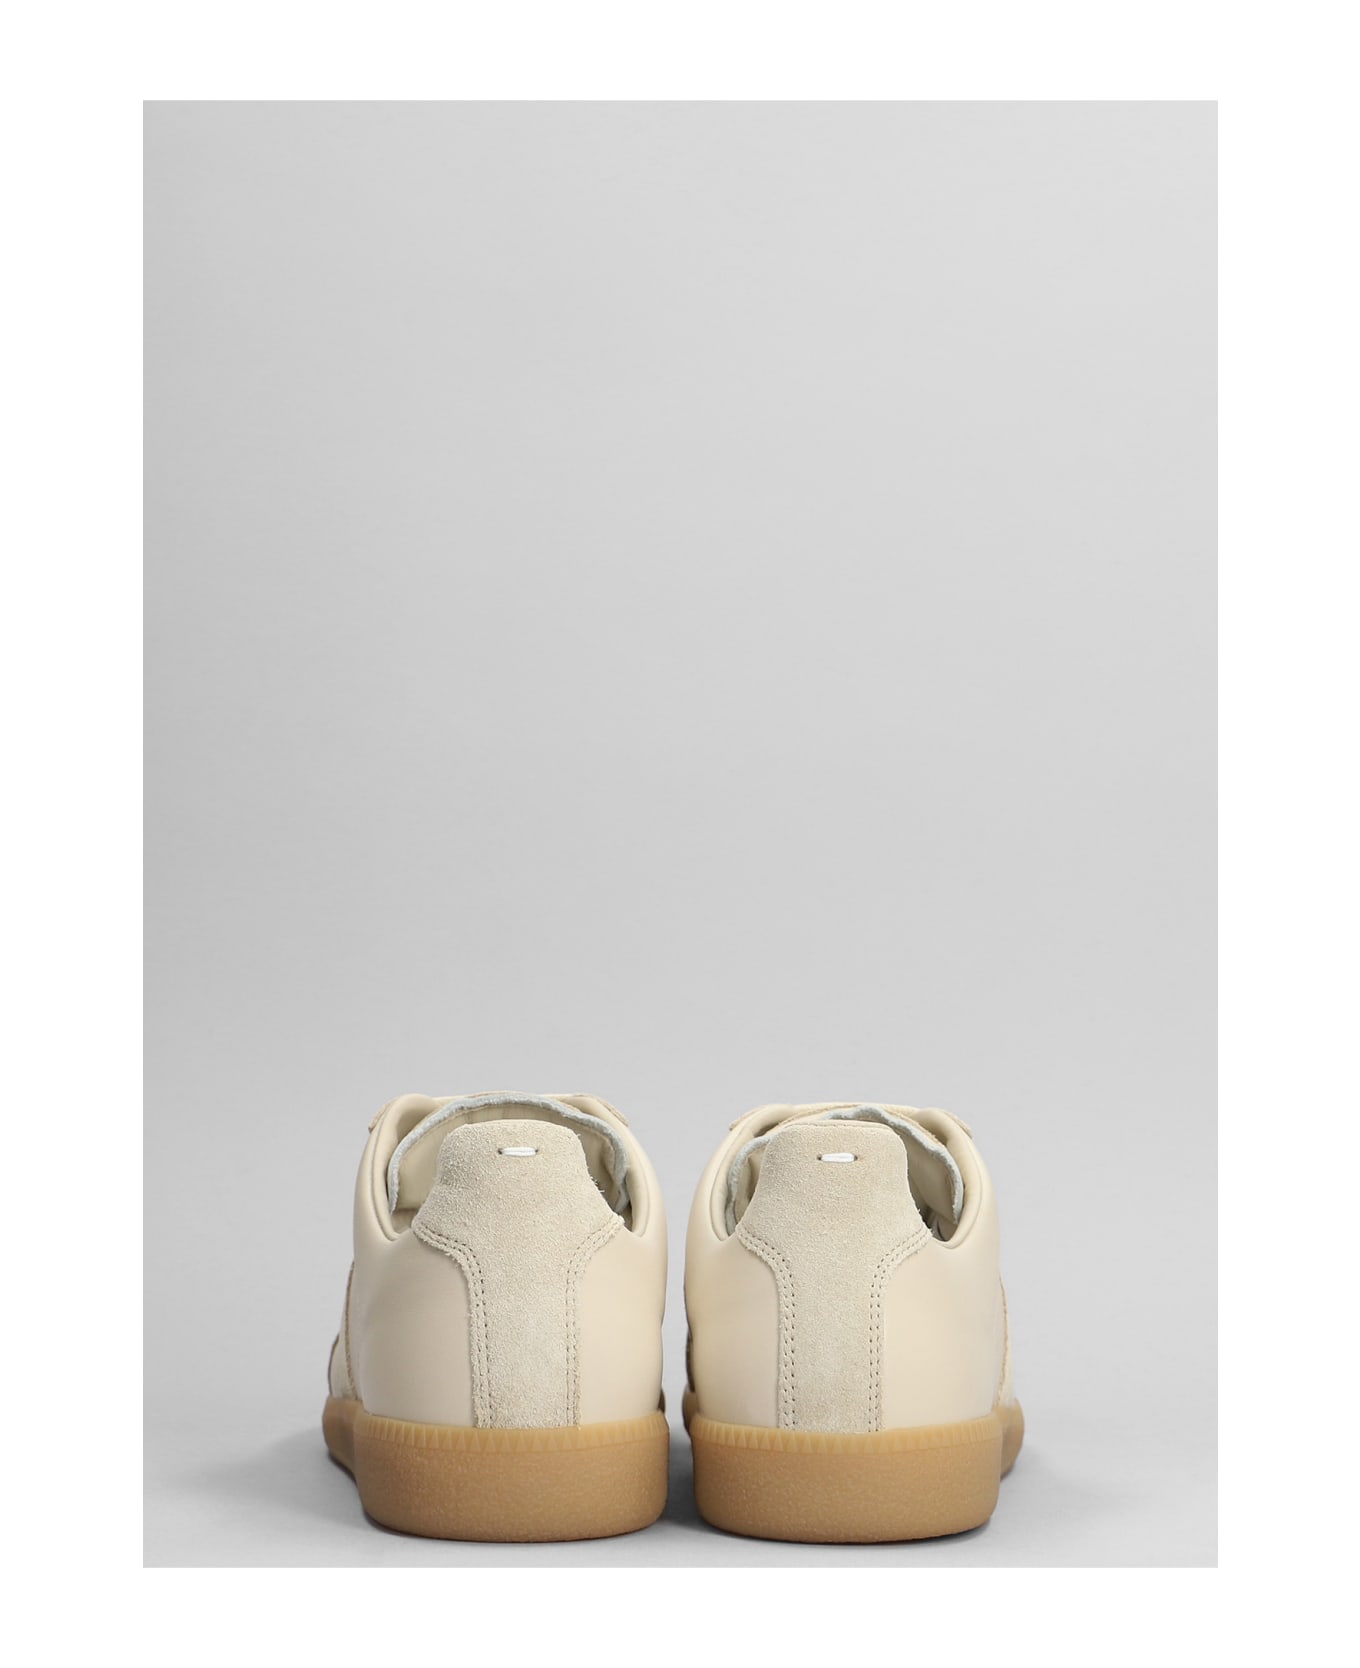 Maison Margiela Replica Sneakers In Beige Suede And Leather - beige